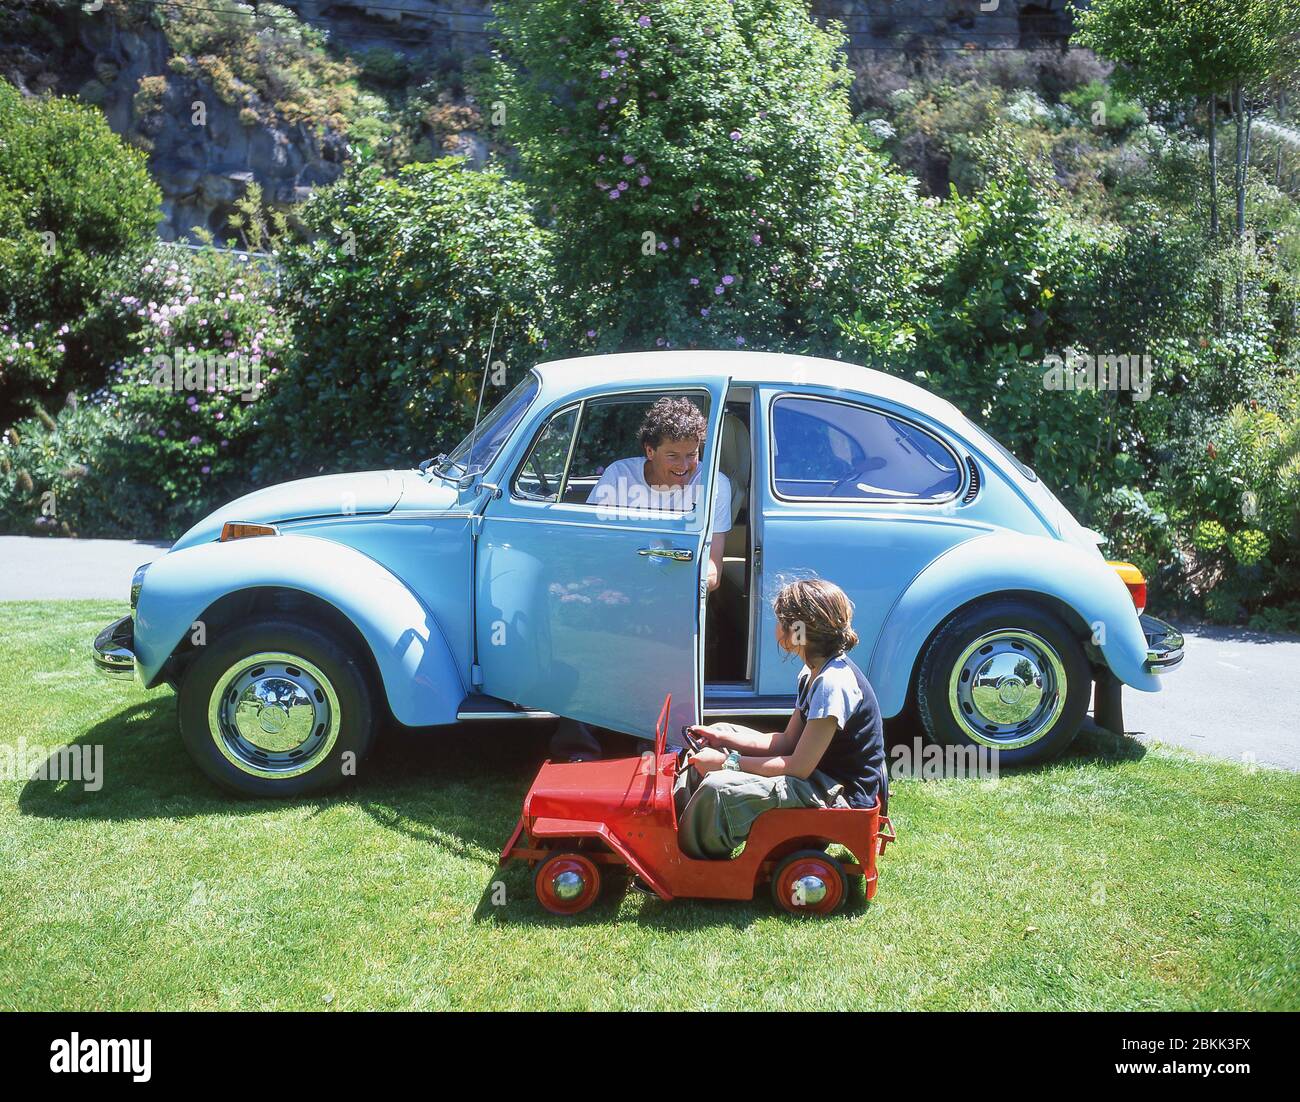 Father and daughter in adult and child vehicles, Sumner, Christchurch, Canterbury Region, New Zealand Stock Photo